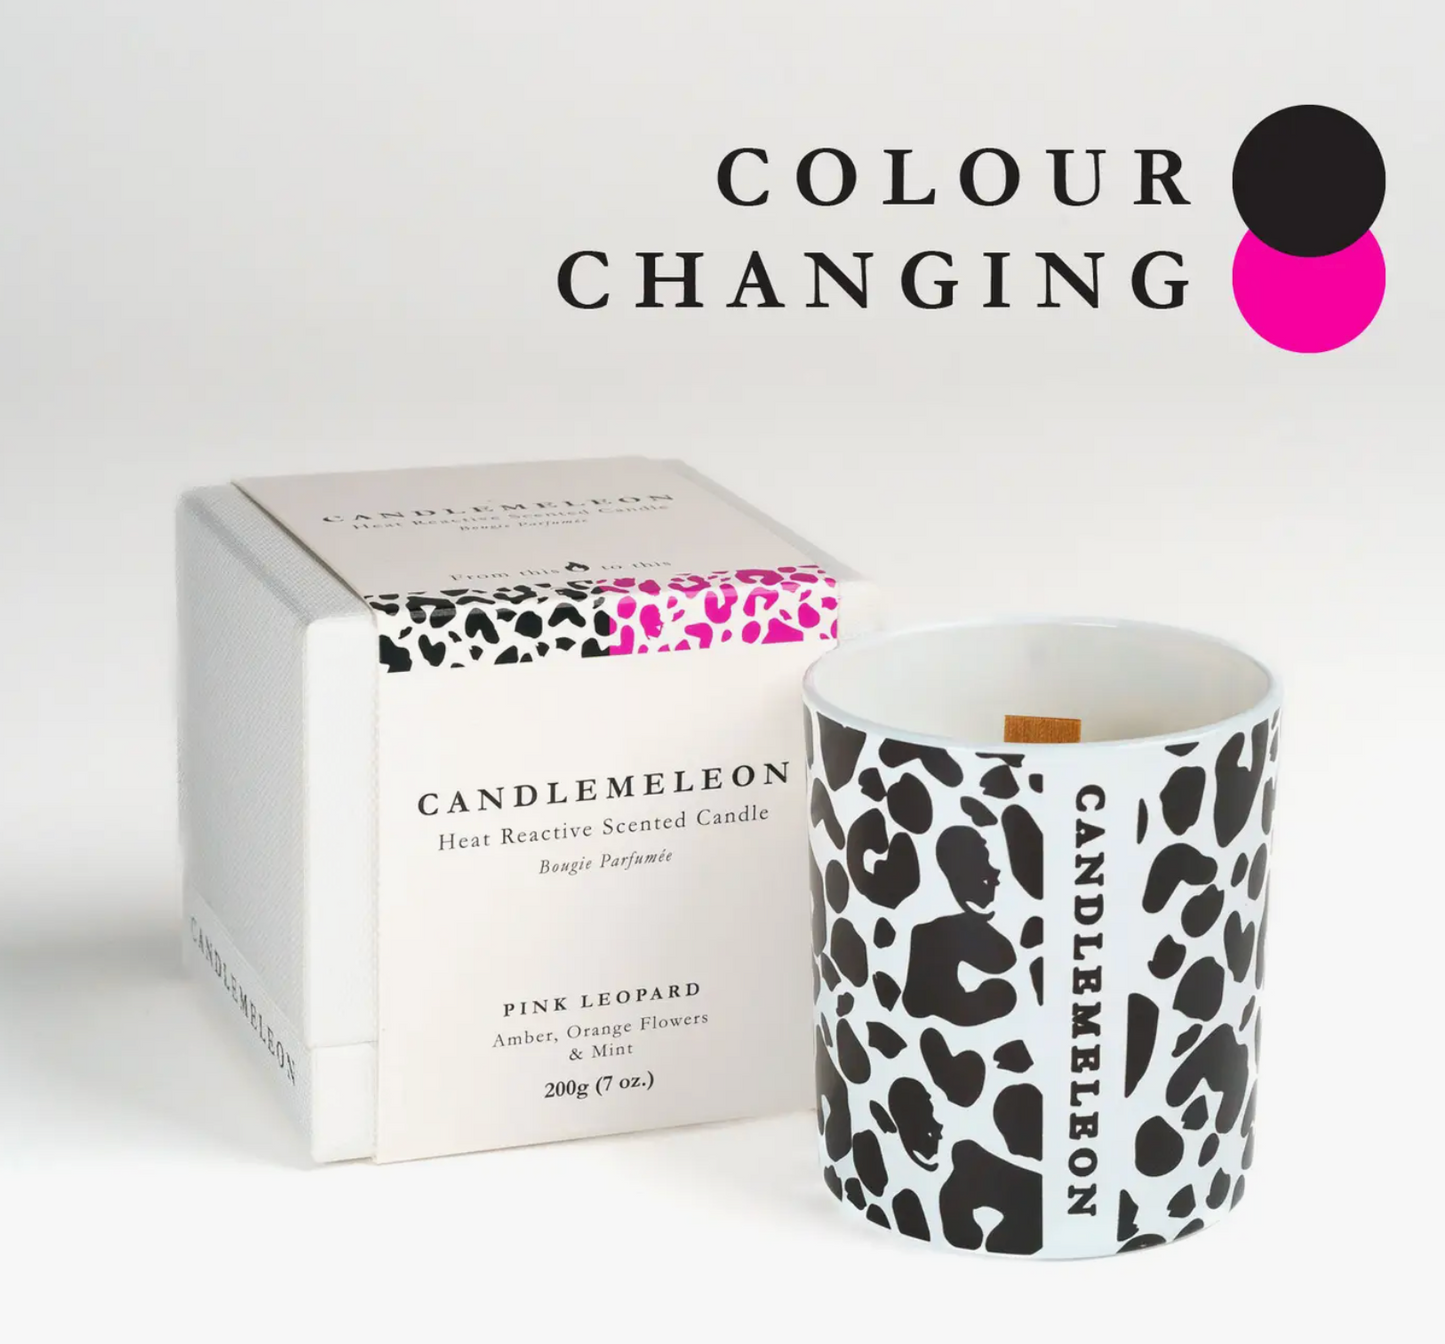 CANDLEMELEON - PINK LEOPARD - Amber, Orange Flowers & Mint Candle